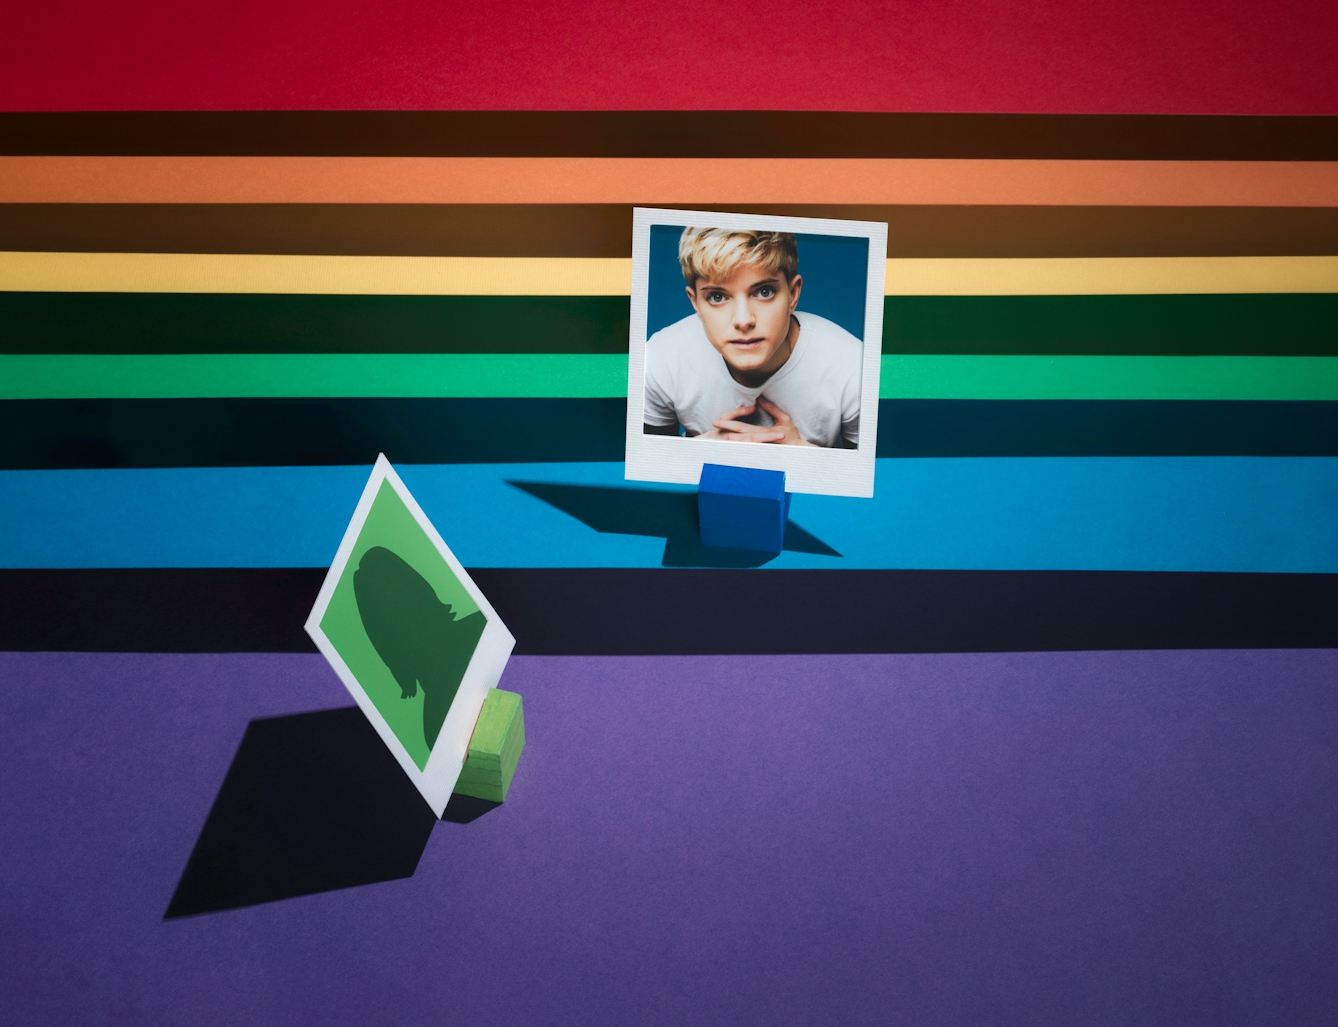 Photograph of a tiered set made up of the LGBTQ+ colours of red, orange, yellow, green, blue and purple.  The tiers form a horizontal line.  On the first tier, the blue one, the portrait of a woman against a blue background is framed in a small white frame.  Below this image, to the left, an anonymous figure on a green background is facing towards her.